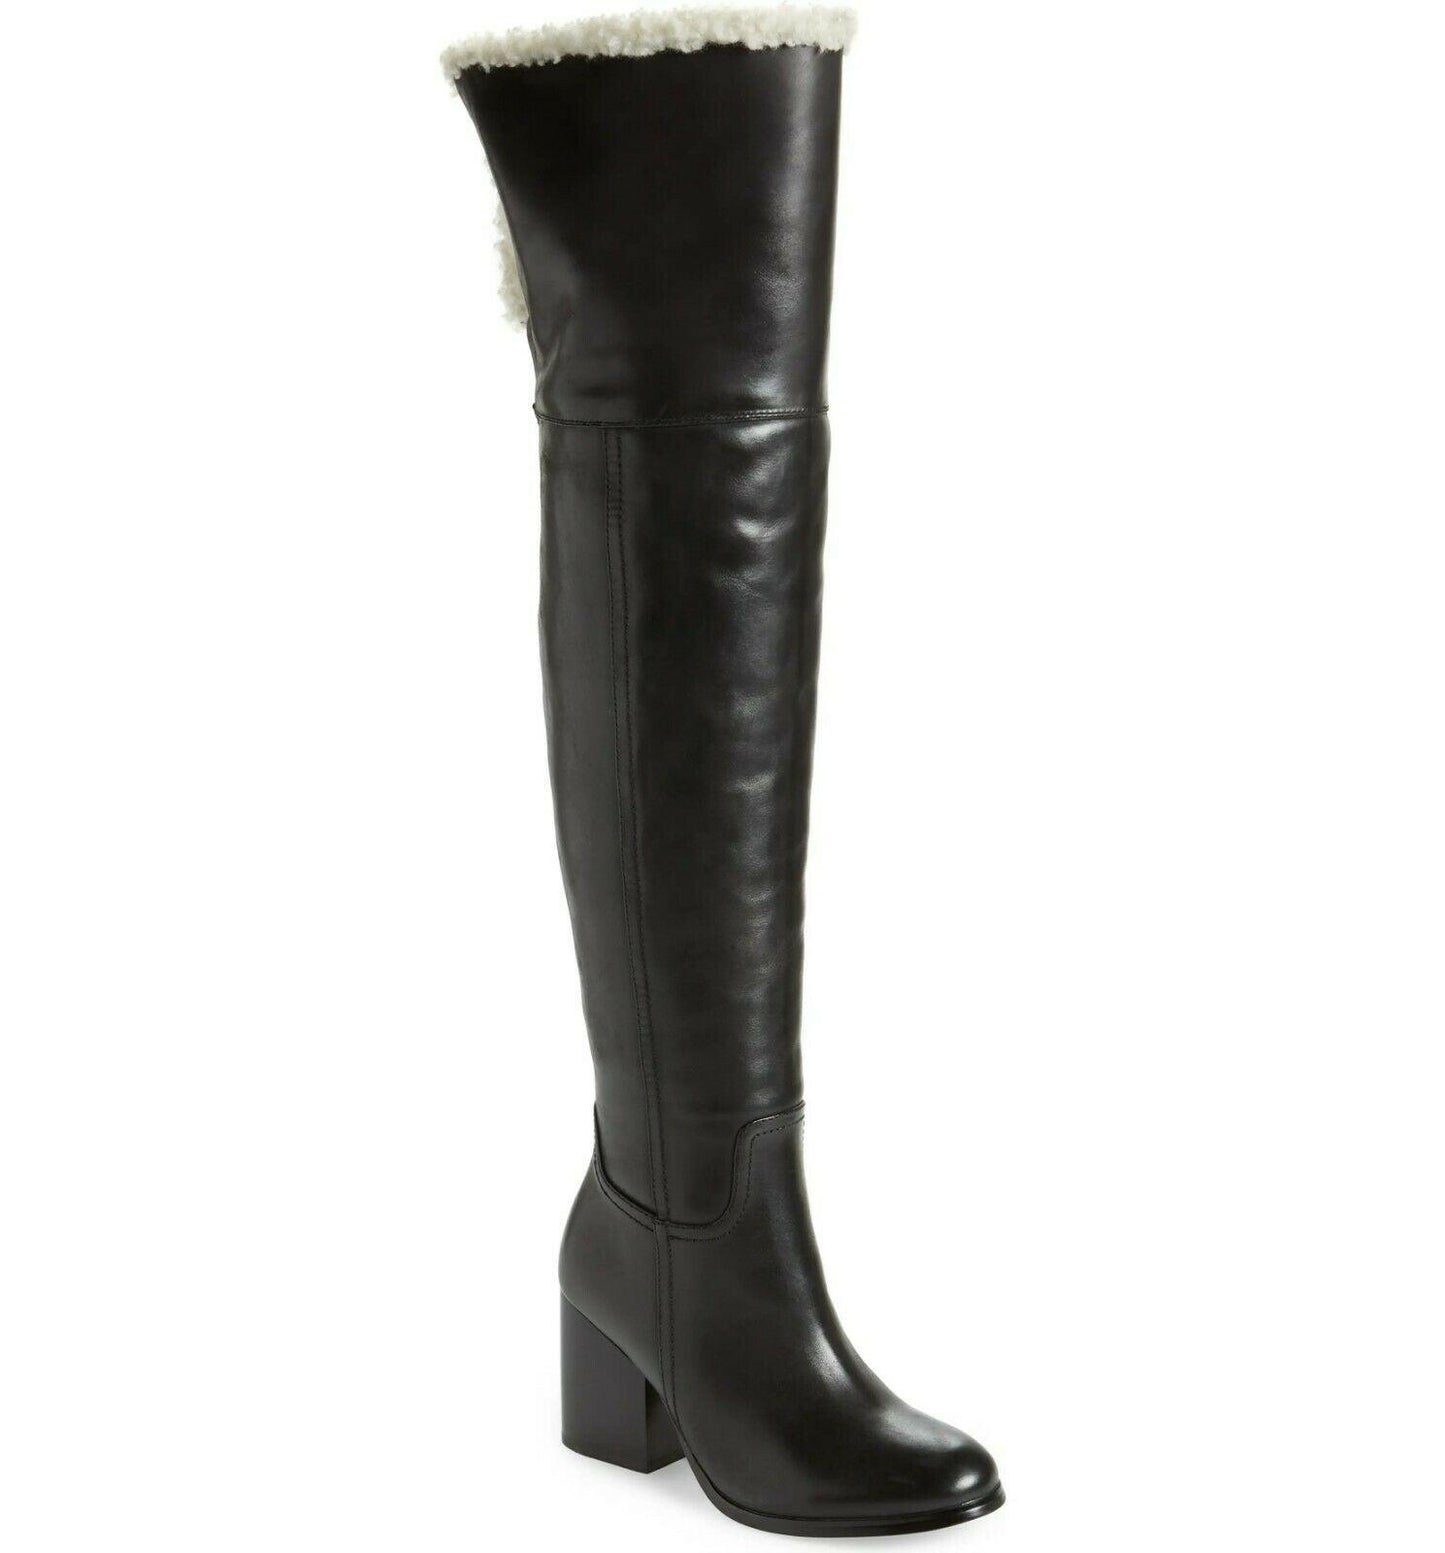 NEW JEFFREY CAMPBELL Woodvurn Black Leather Ivory Fur Over the Knee Boot 8.5 - SVNYFancy